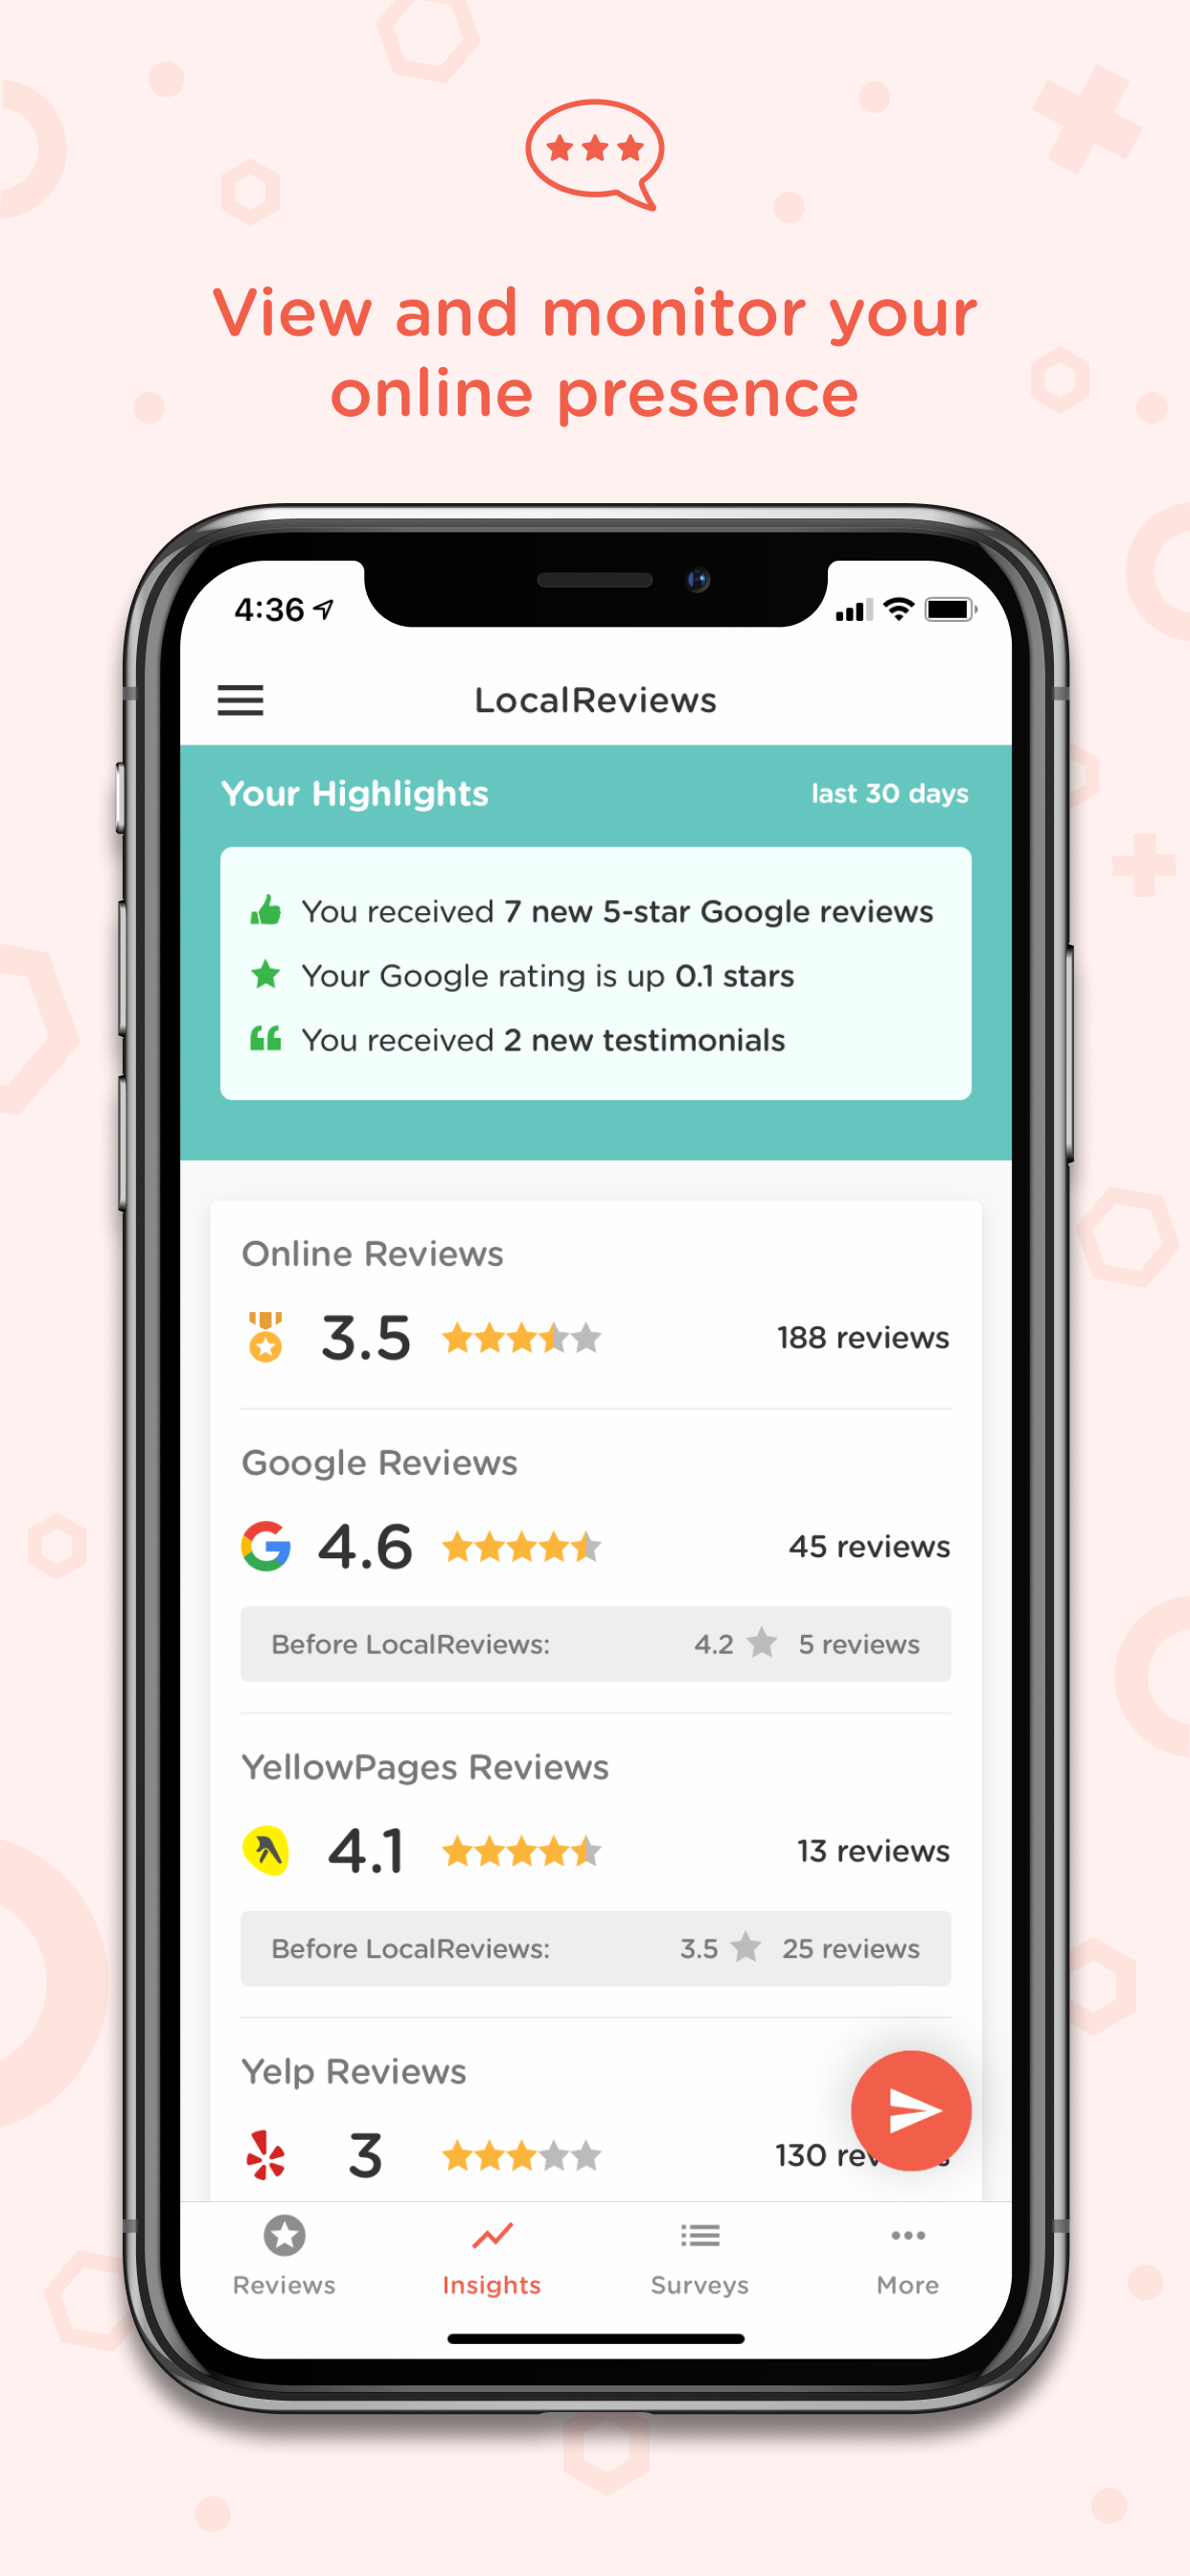 With all of your reviews and feedback in one place, you can see how you’re doing while automatically identifying trends.